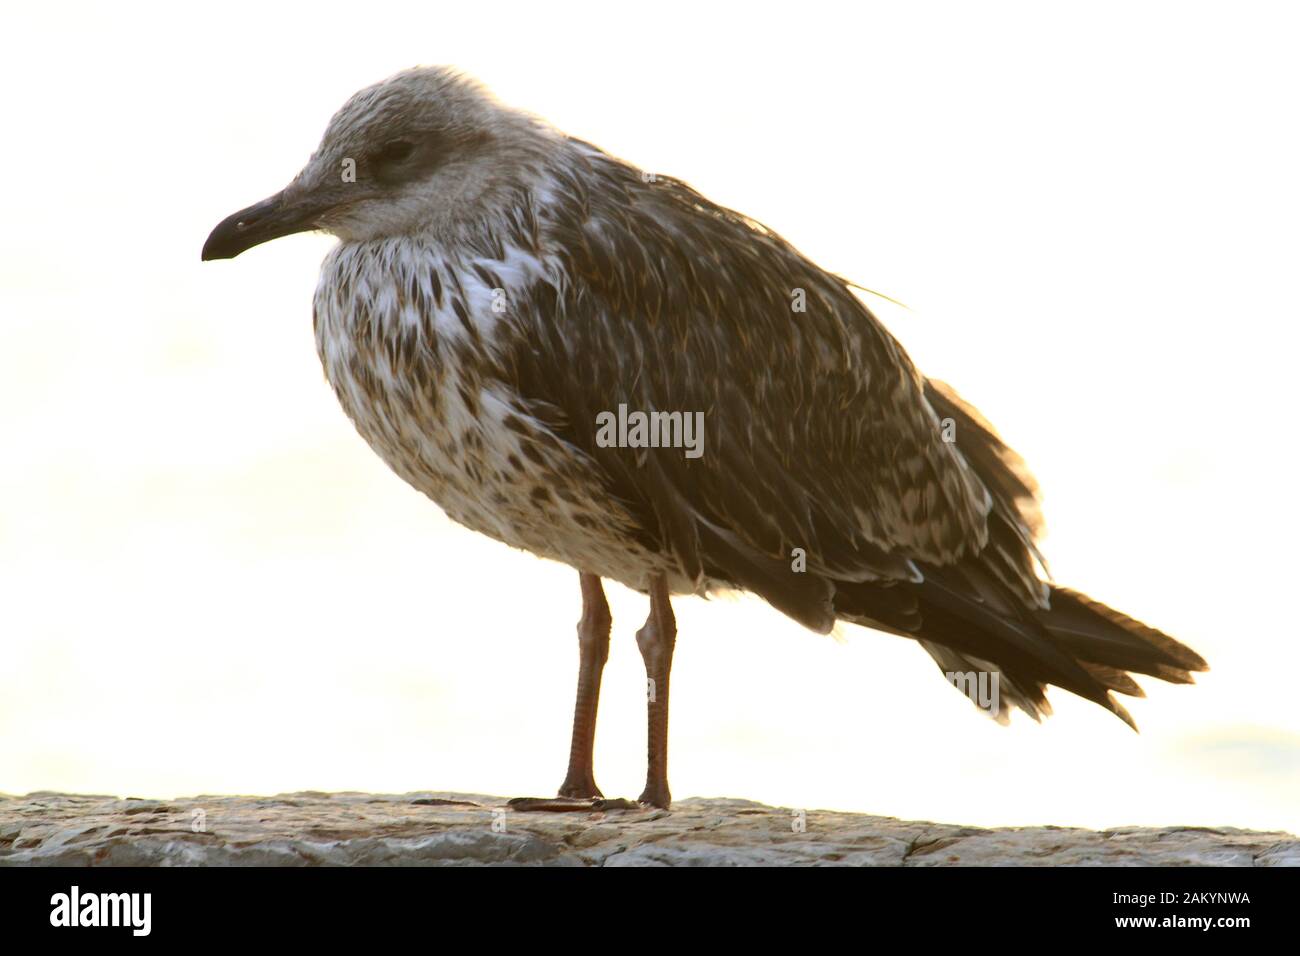 An old seagull polluted by the sea Stock Photo